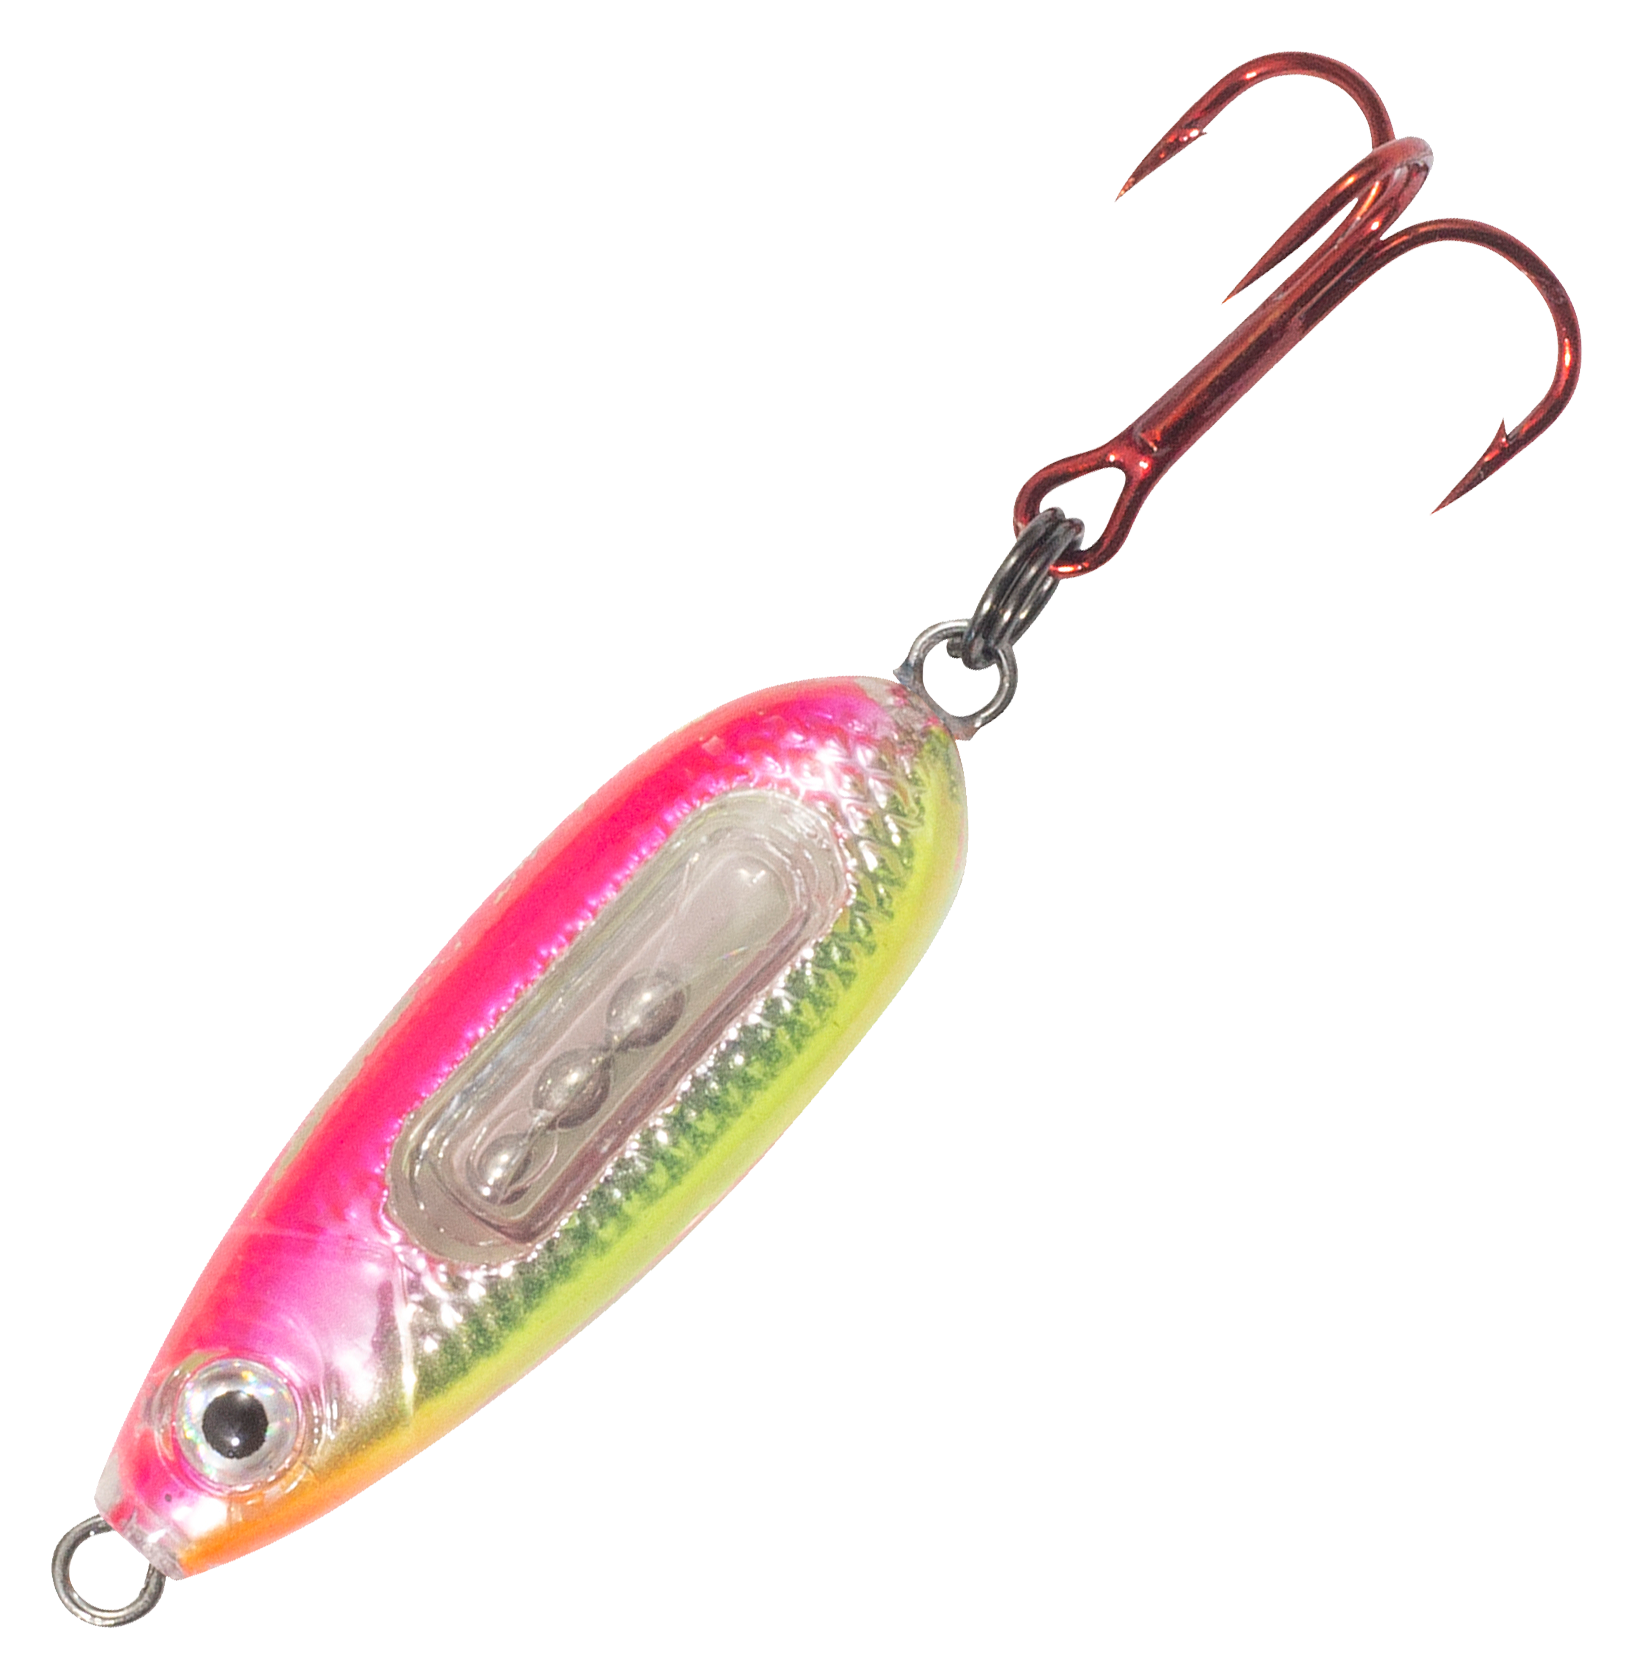 Northland Fishing Tackle Glass Buck-Shot Spoon - 1/4 oz - Pink Silver